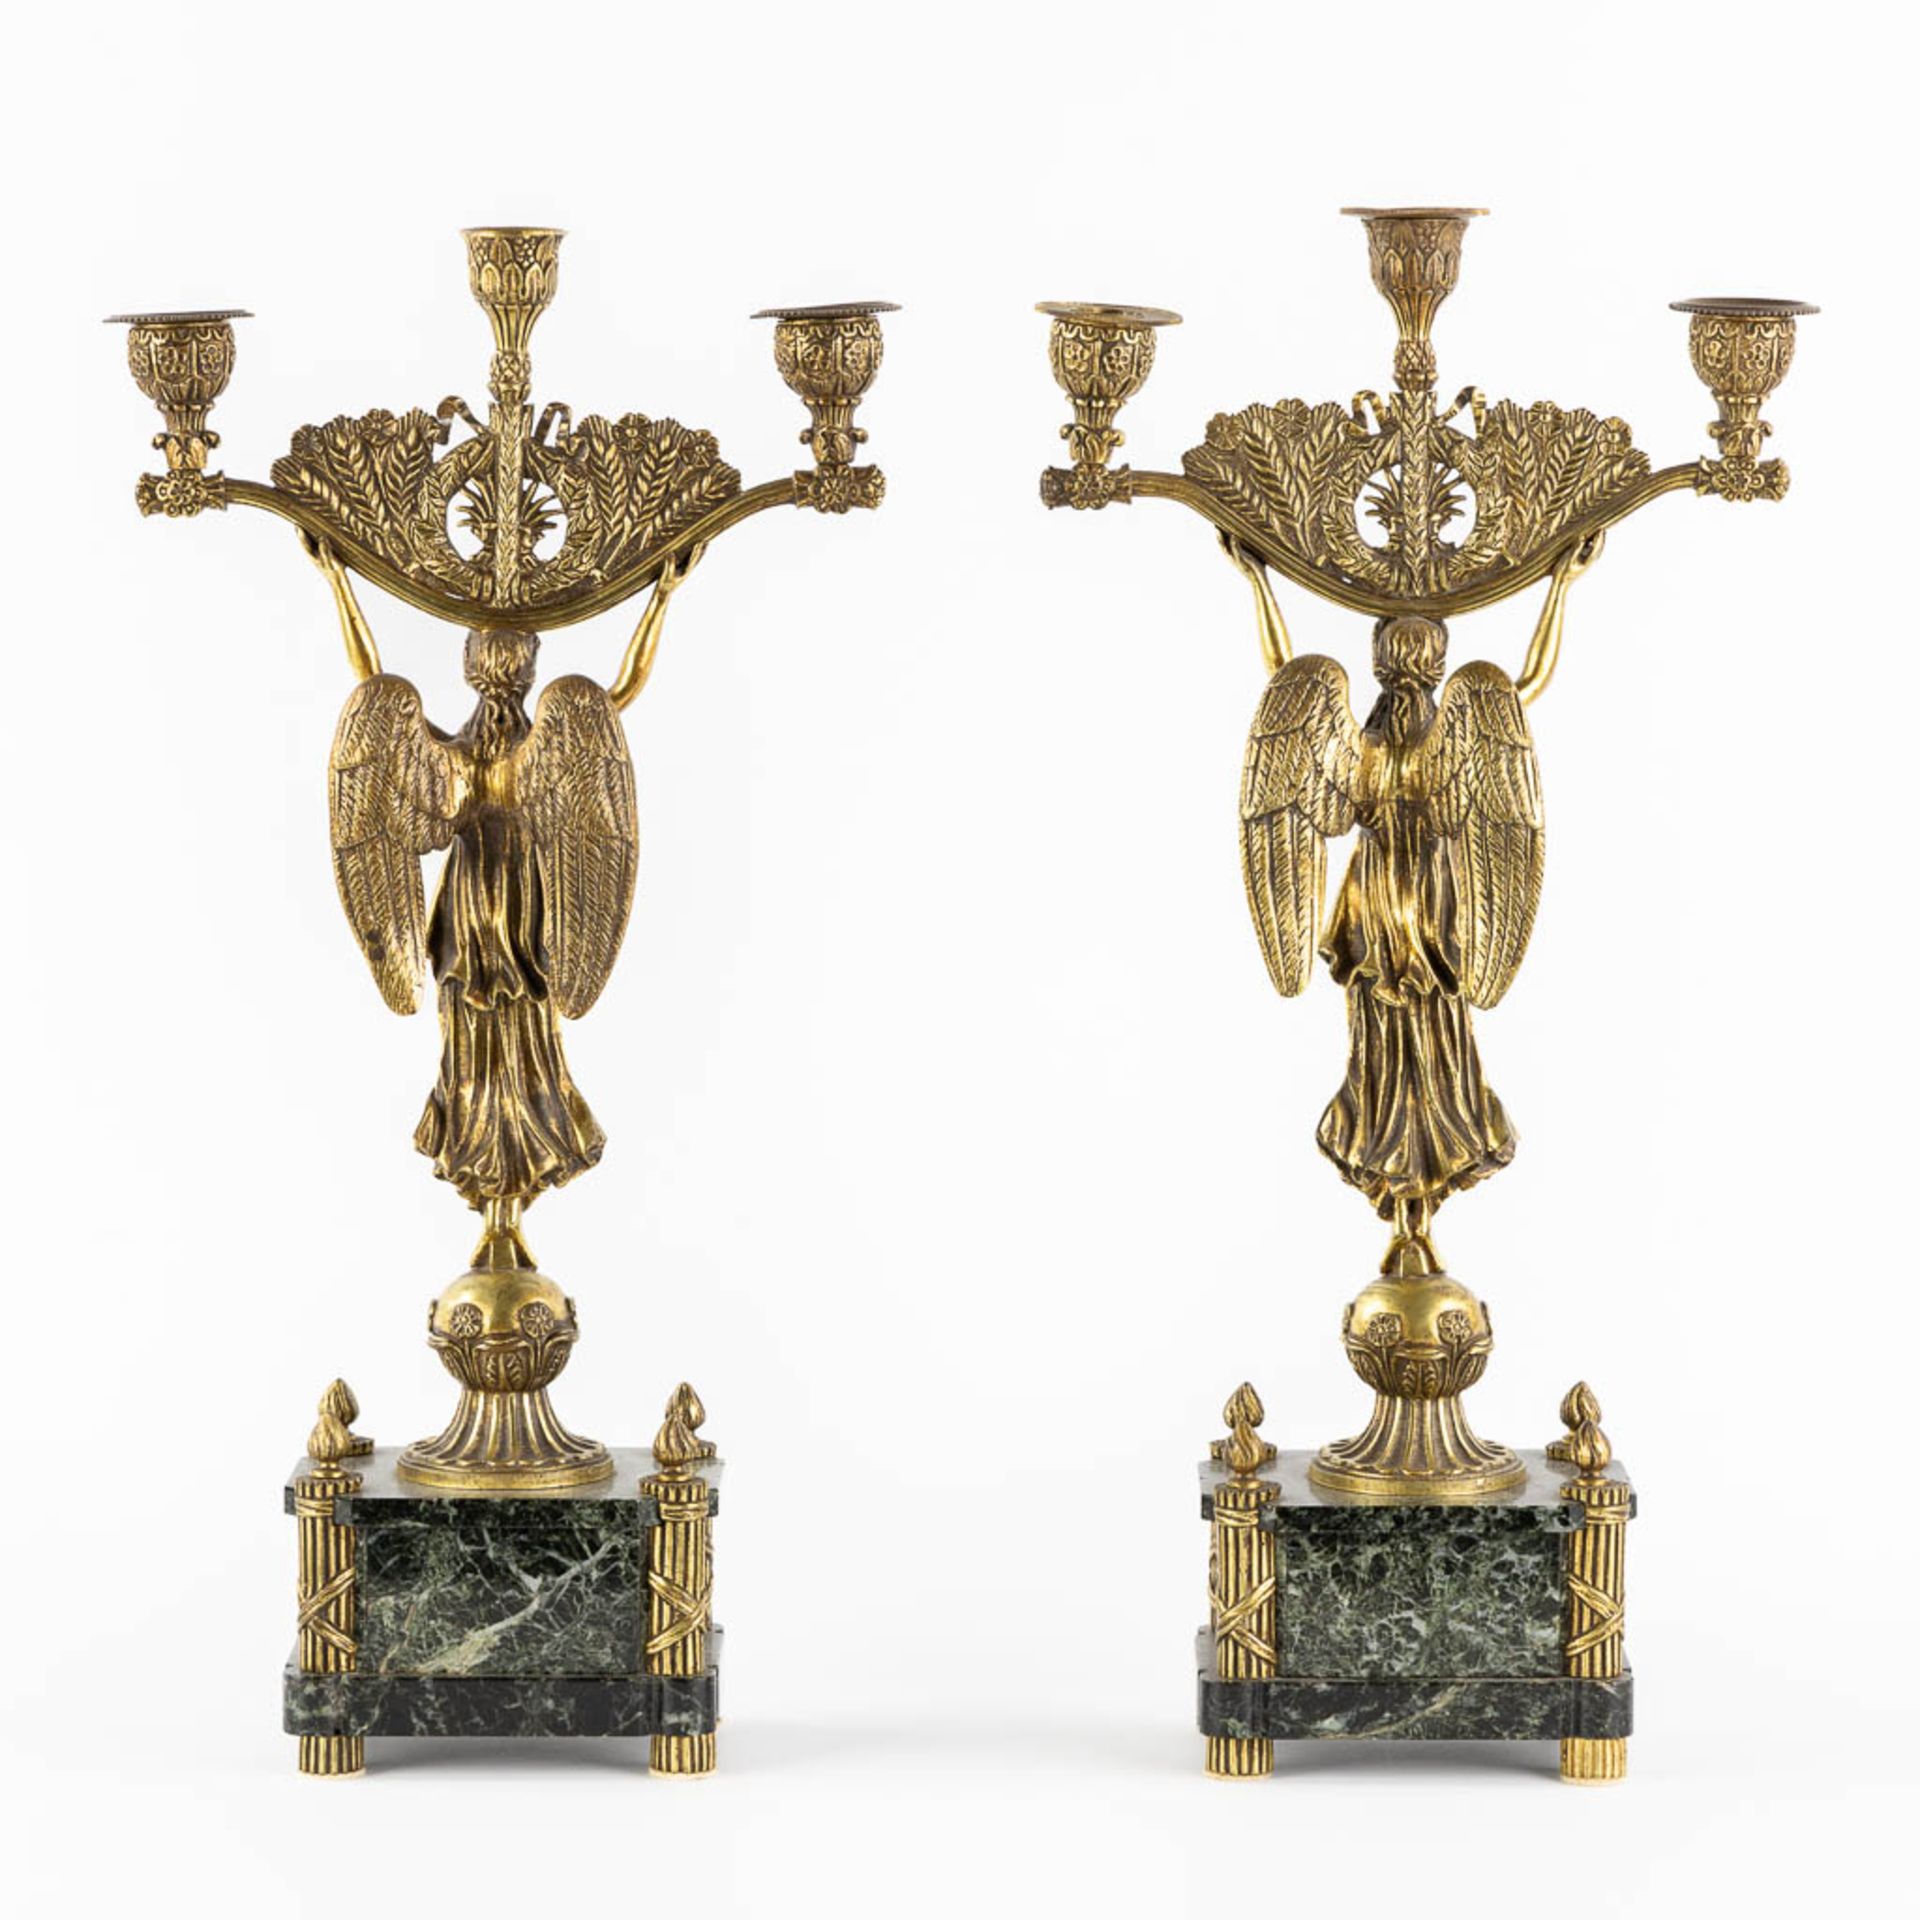 Two pairs of candelabra, bronze and cloisonné, Empire and Louis XVI style. (H:49 x D:26 cm) - Bild 12 aus 18